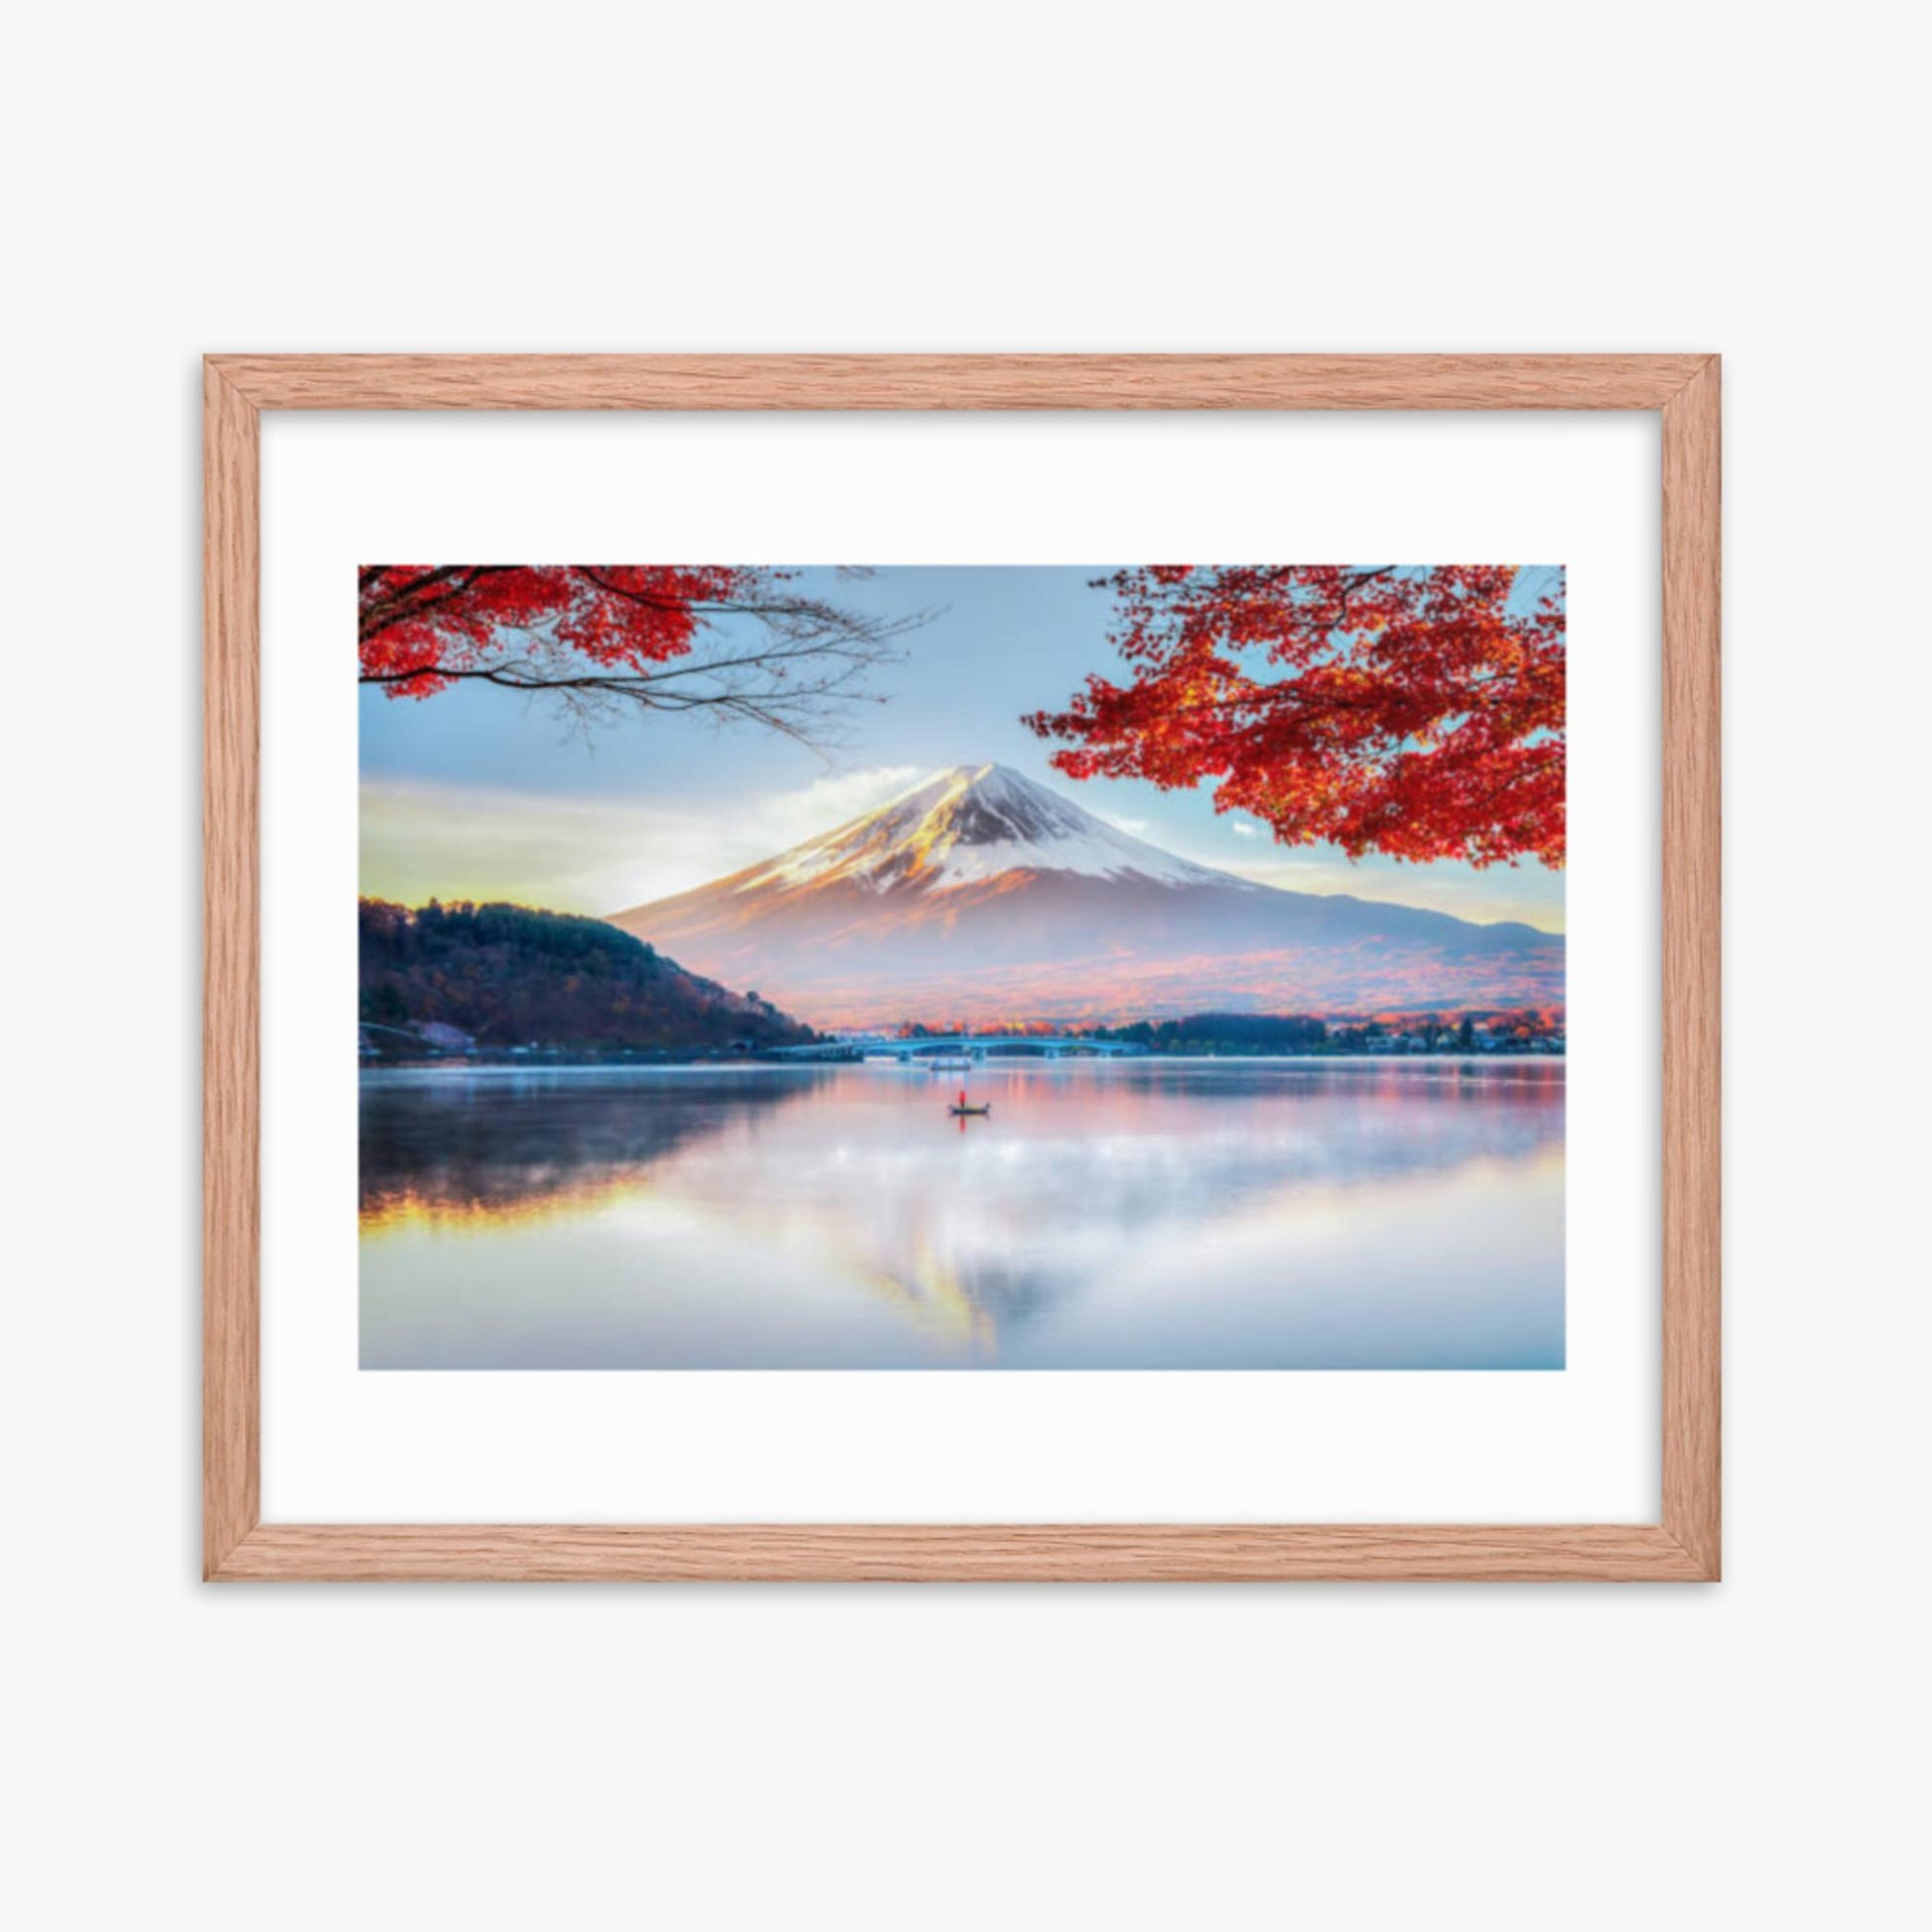 Fuji Mountain , Red Maple Tree and Fisherman Boat with Morning Mist in Autumn, Kawaguchiko Lake, Japan 16x20 in Poster With Oak Frame